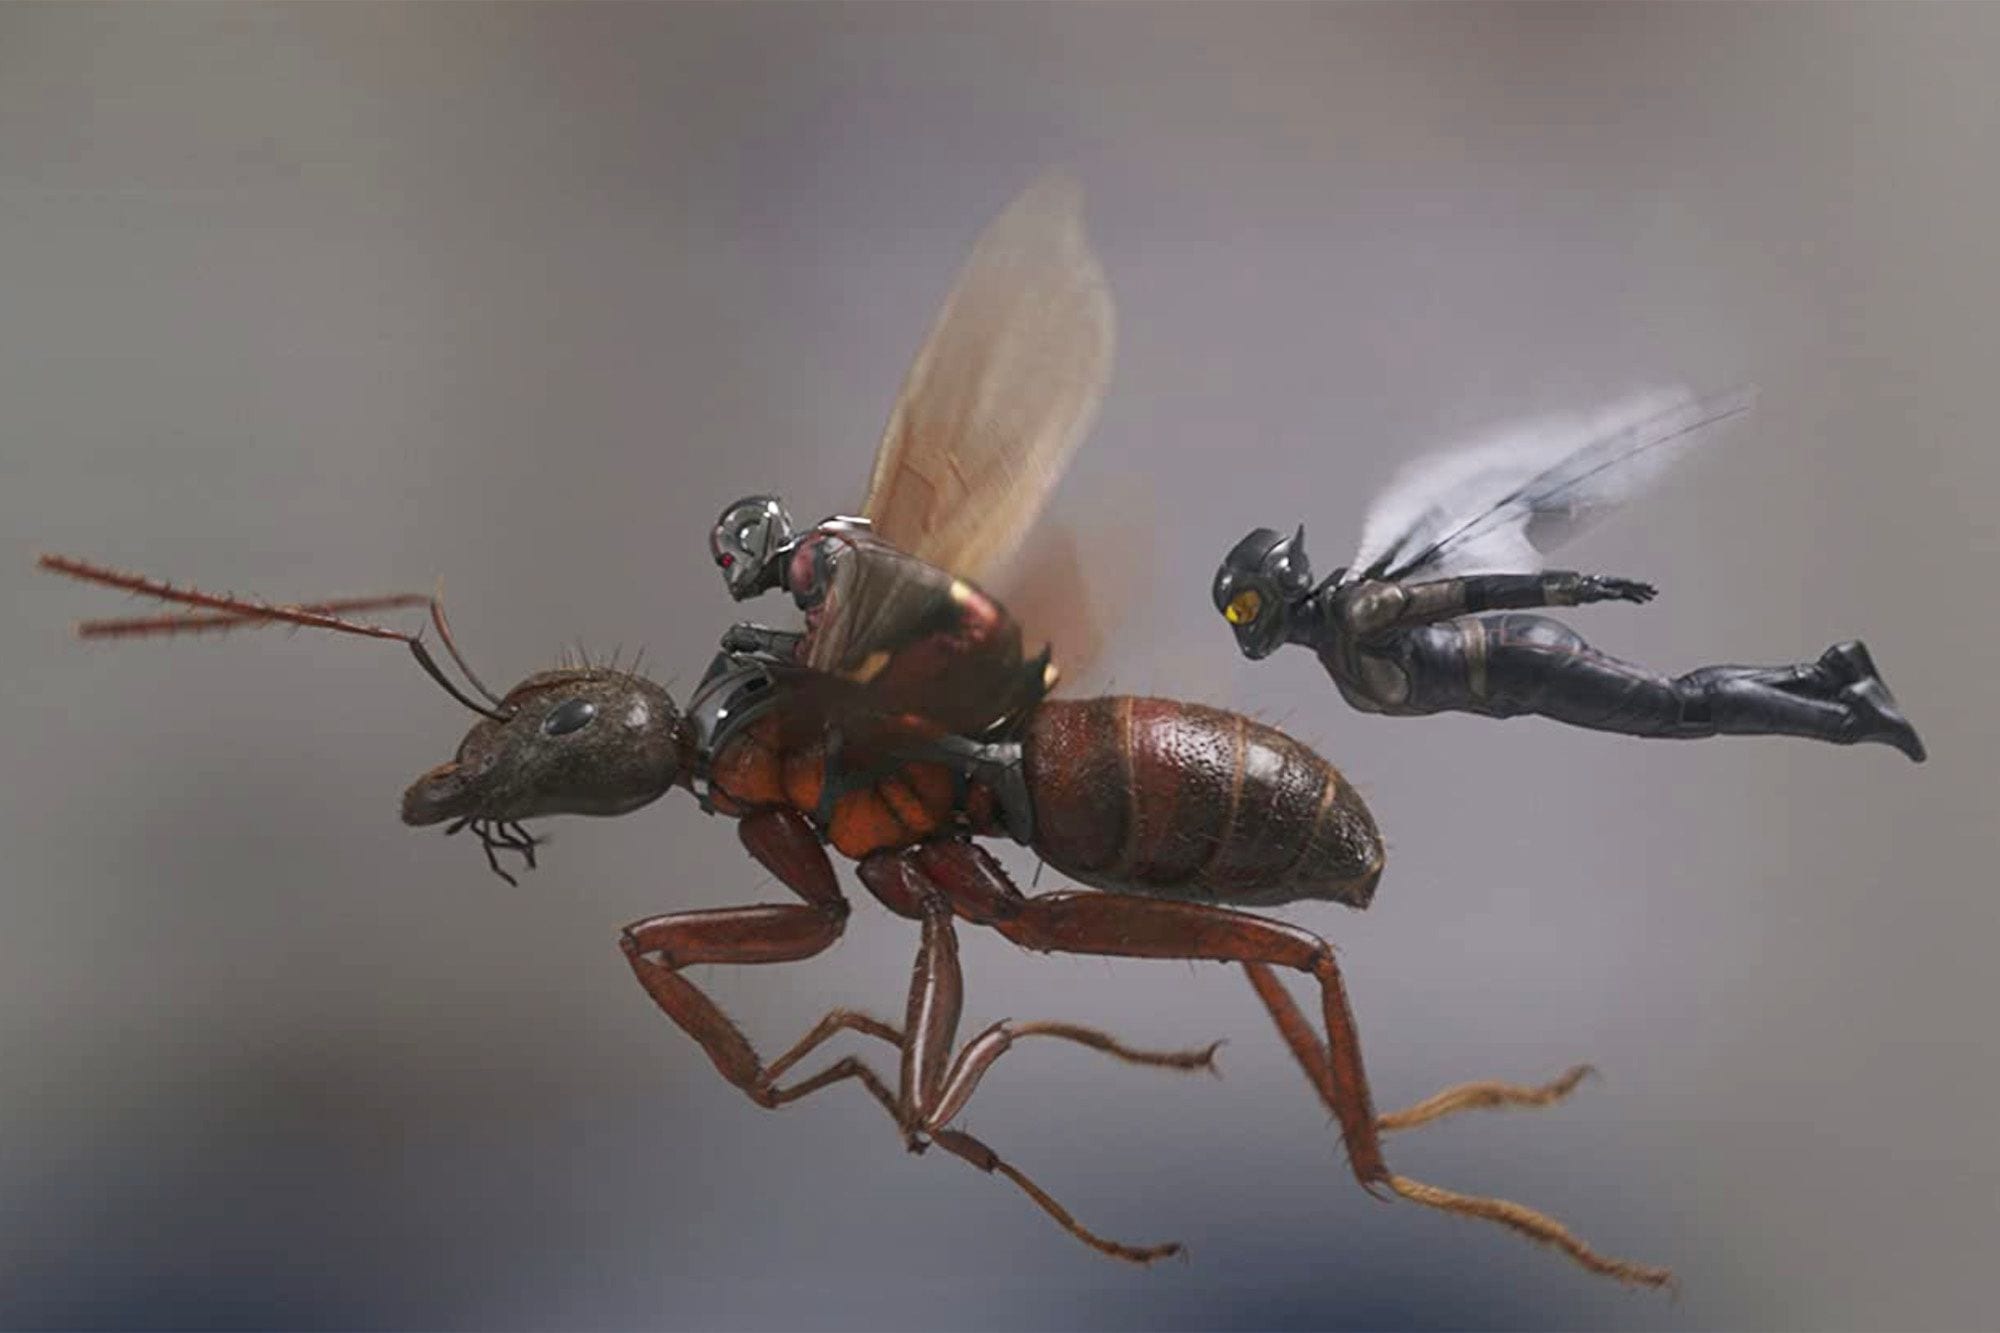 Ant-Man and the Wasp - Wikipedia